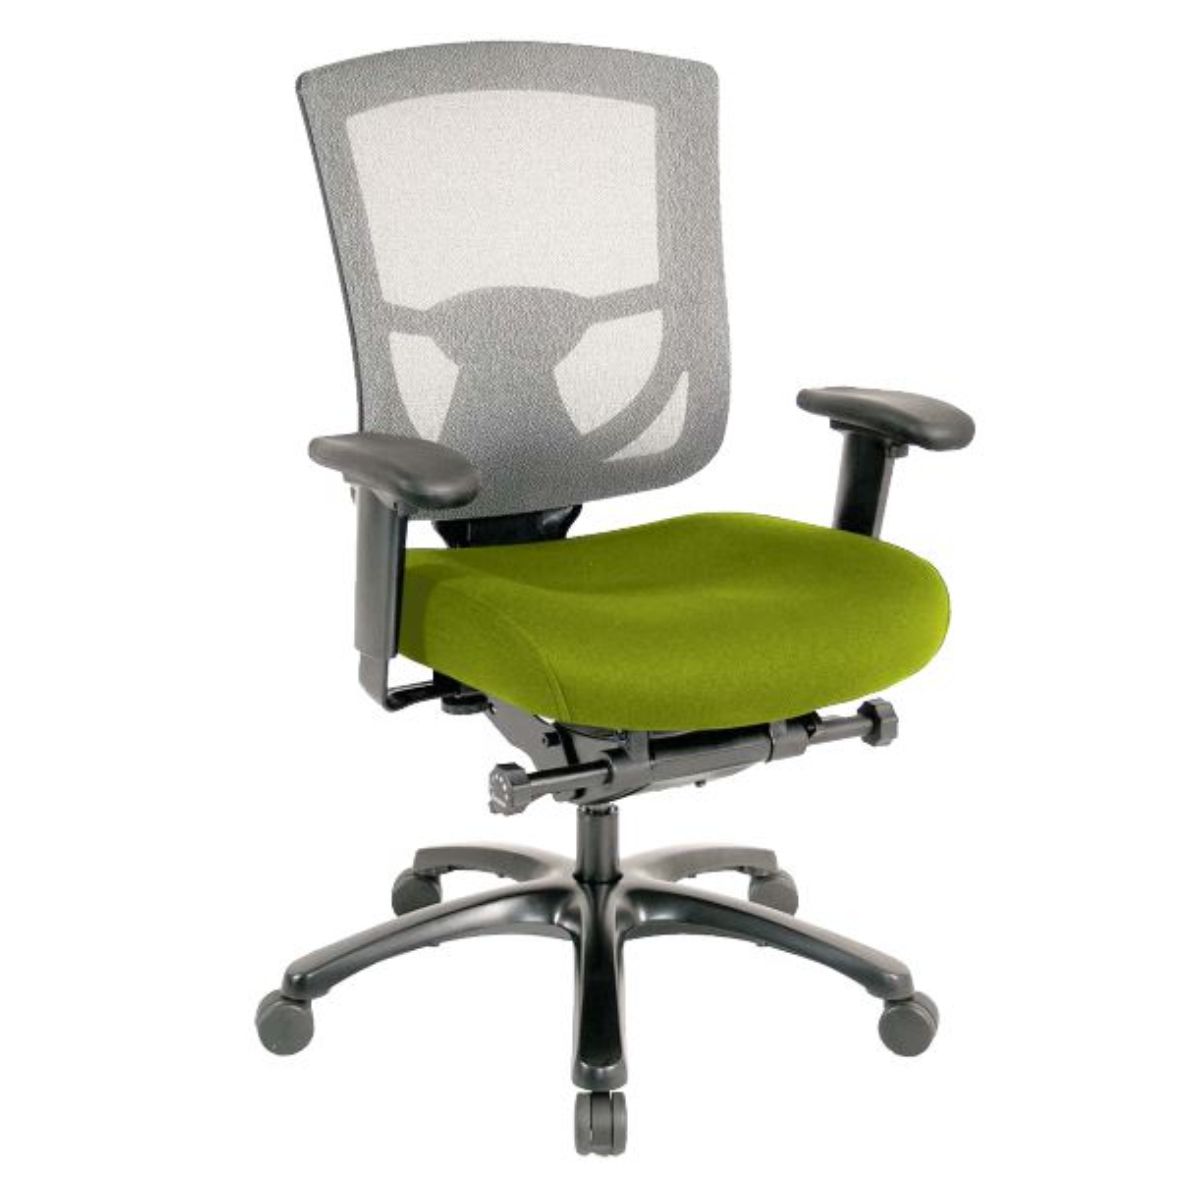 Green and Black Adjustable Swivel Mesh Rolling Office Chair-372459-1